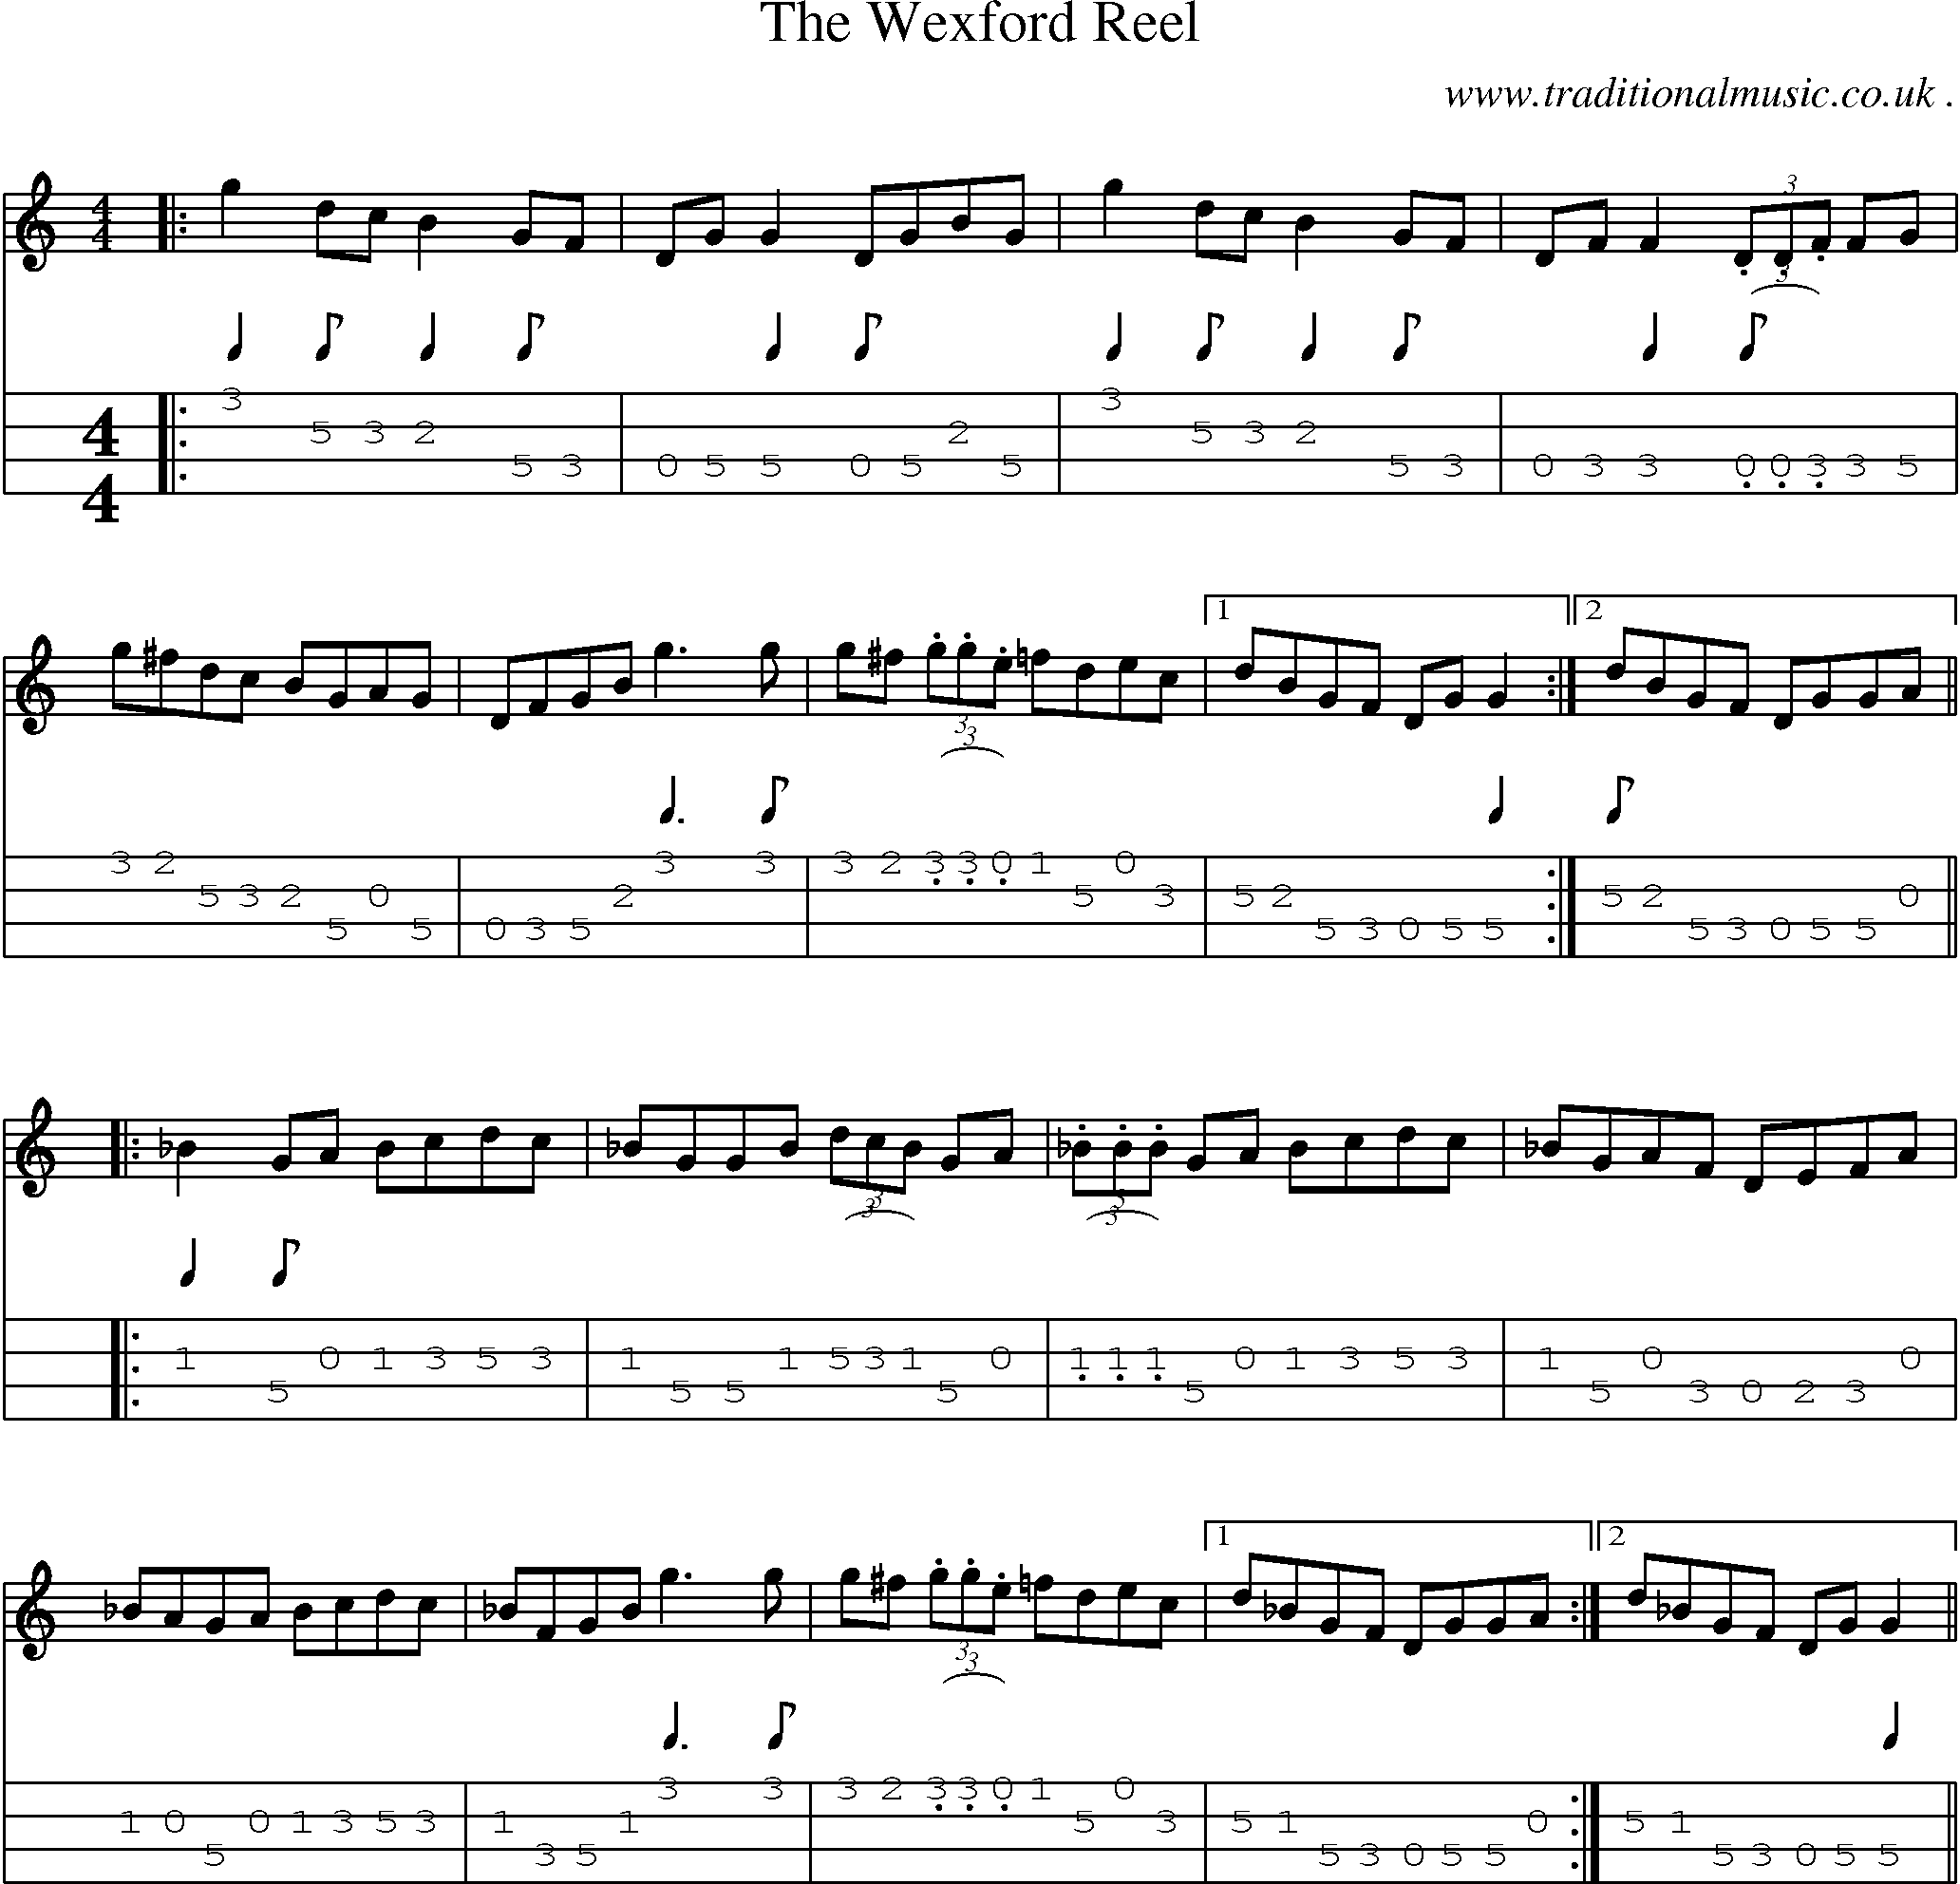 Sheet-Music and Mandolin Tabs for The Wexford Reel